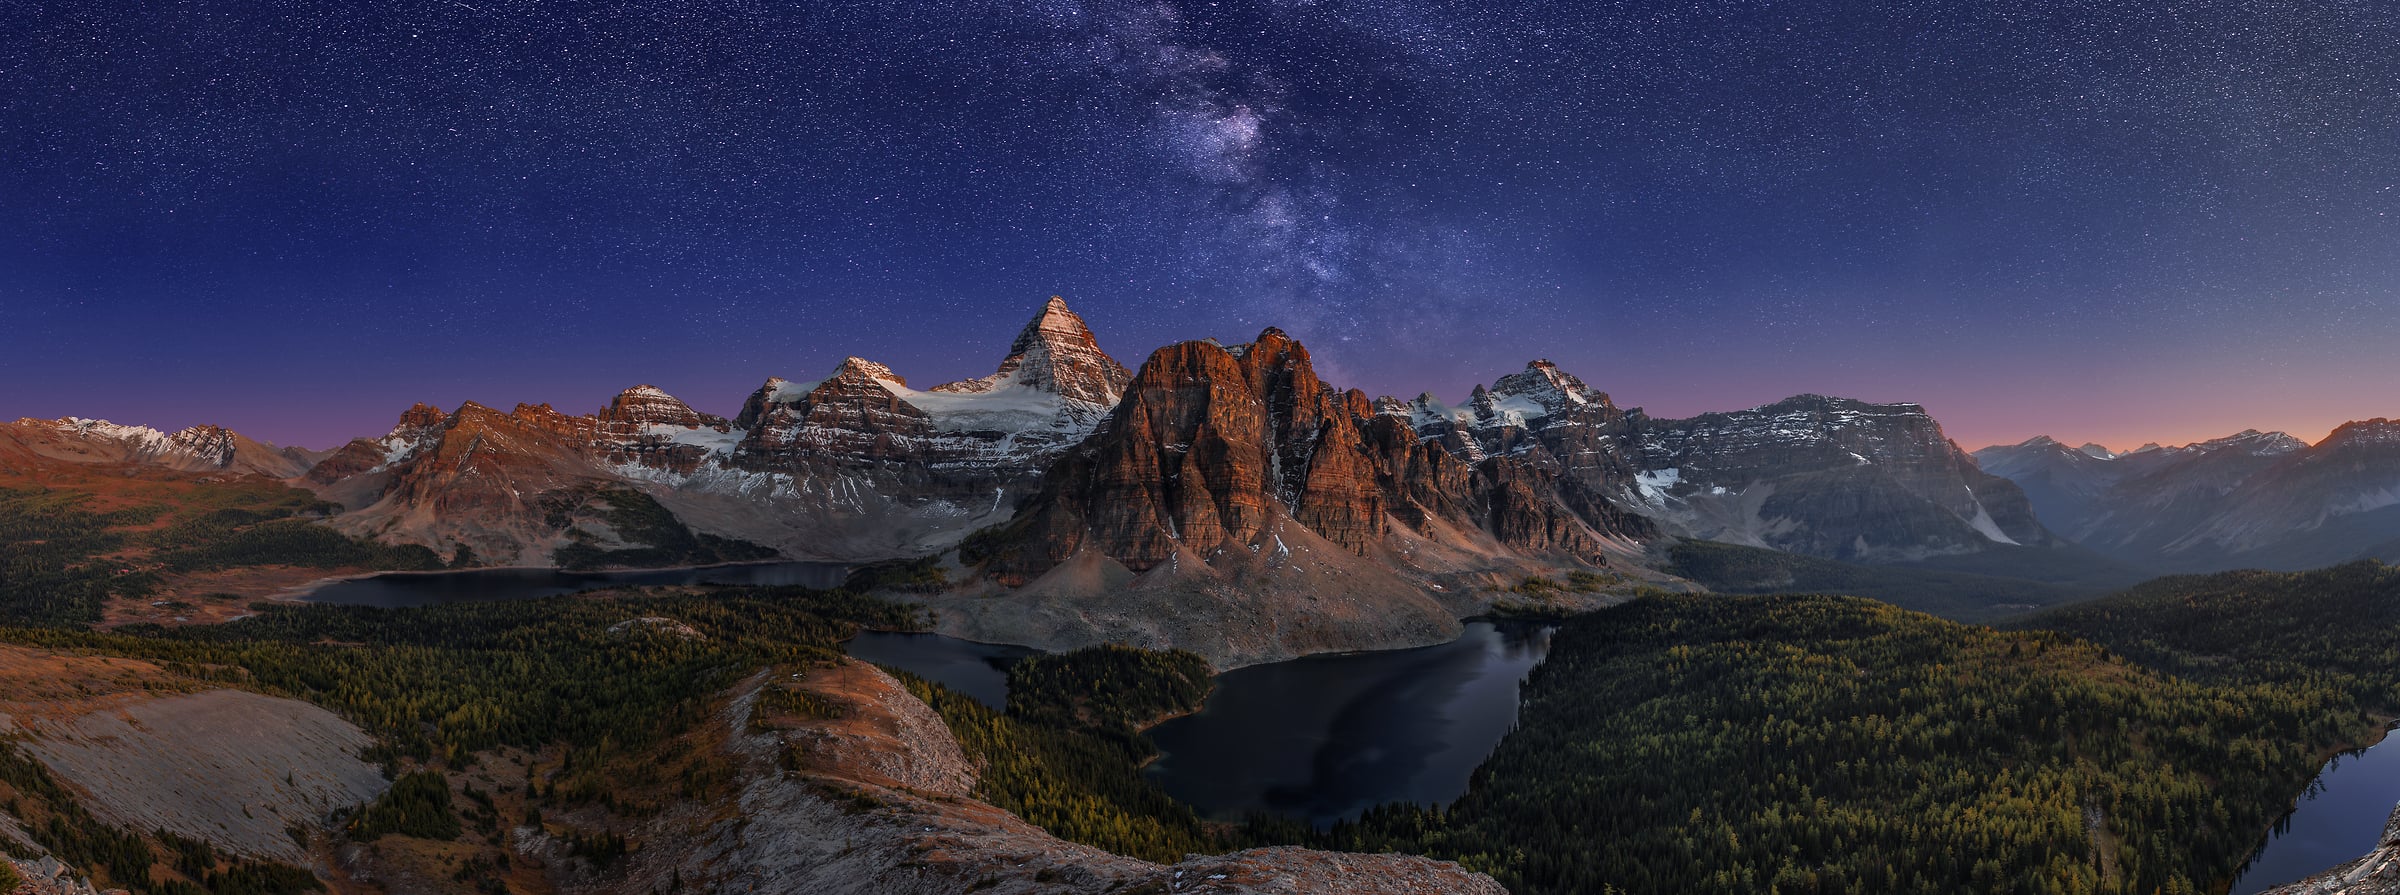 231 megapixels! A very high resolution, large-format VAST photo print of mountains, lakes, the milky way, stars, and Mount Assiniboine; fine art landscape photo created by Chris Collacott in Assiniboine Provinical Park, British Columbia, Canada.